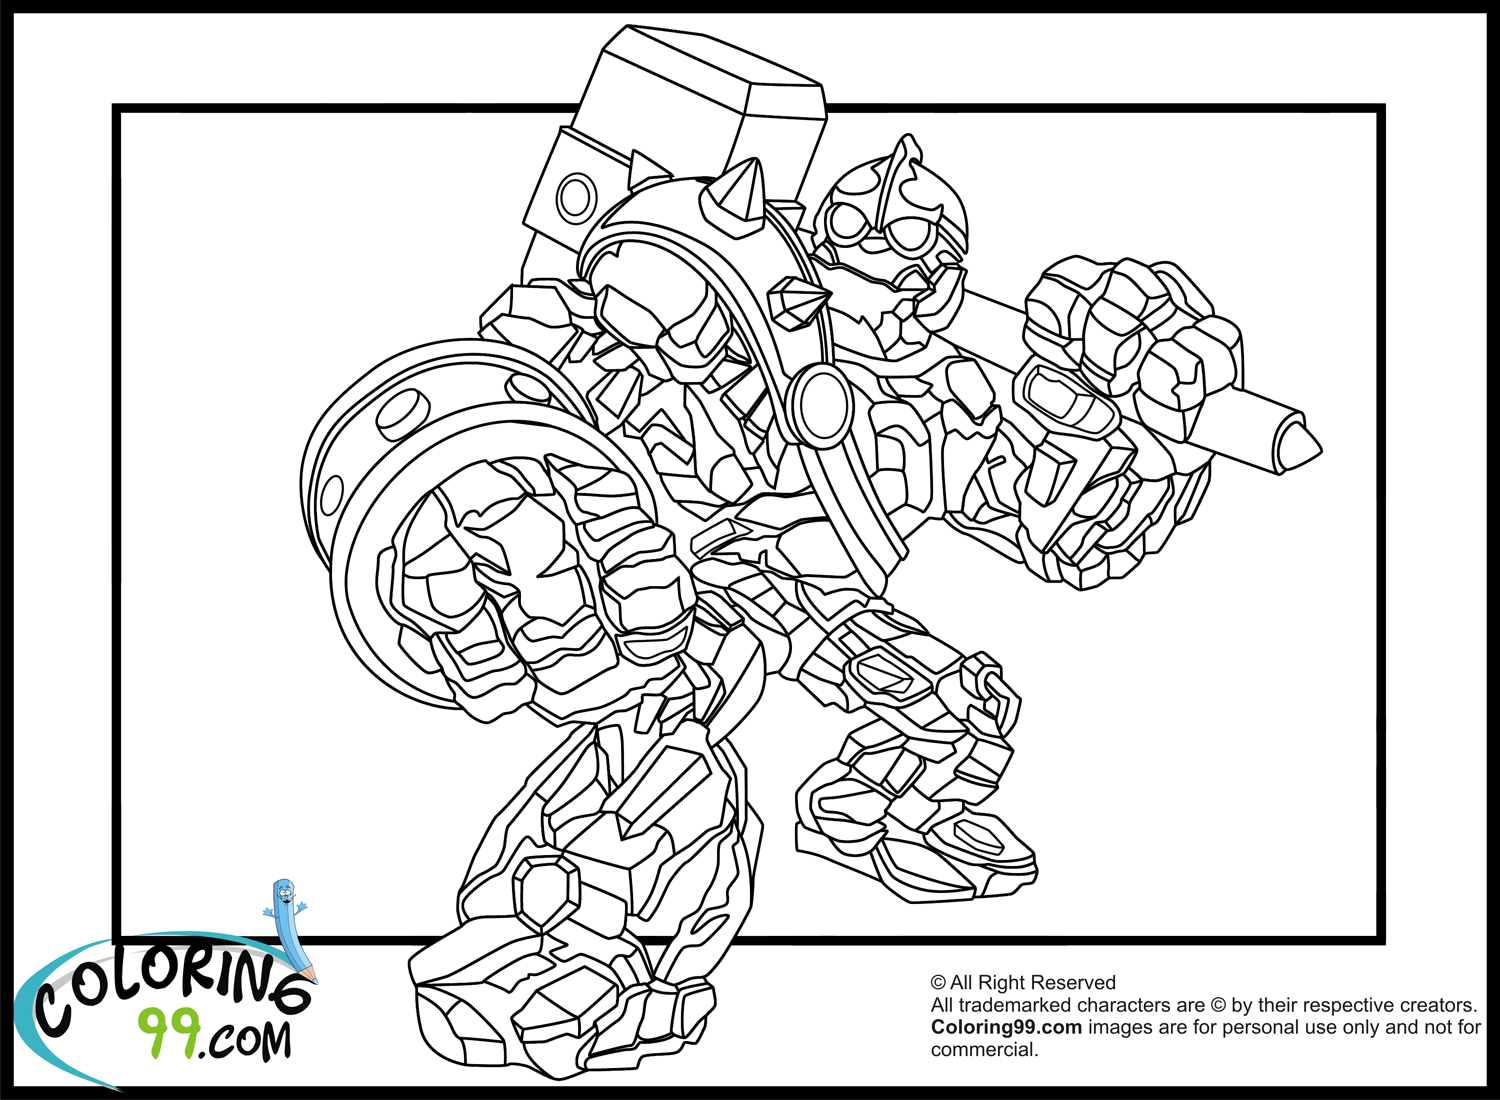 Download Skylanders Giants Coloring Pages | Minister Coloring